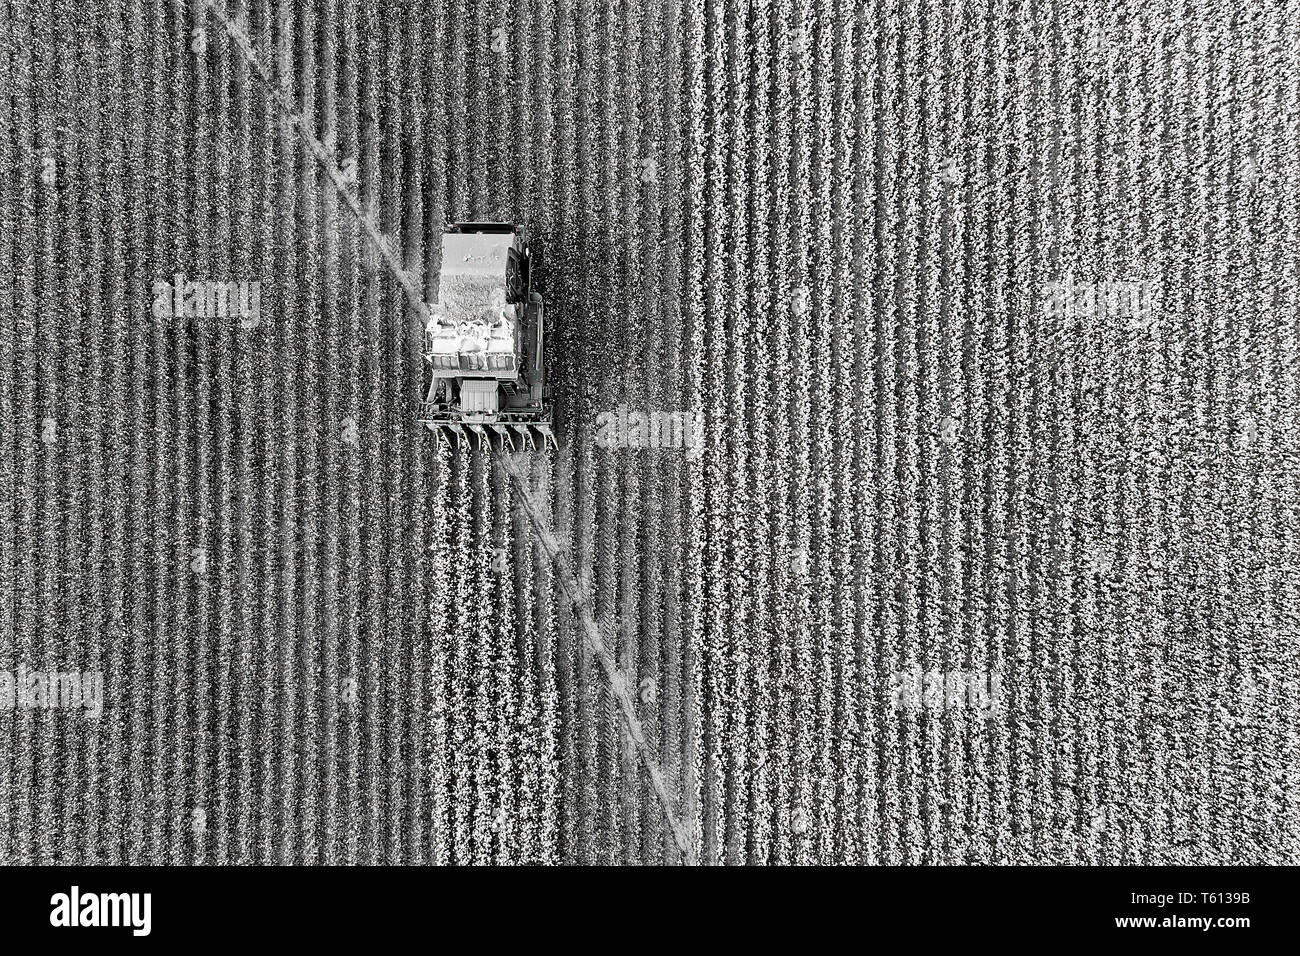 Cotton harvest combine tractor driving on cotton field riping grown cotton raw material in aerial overhead view - black white to contrast white cotton Stock Photo